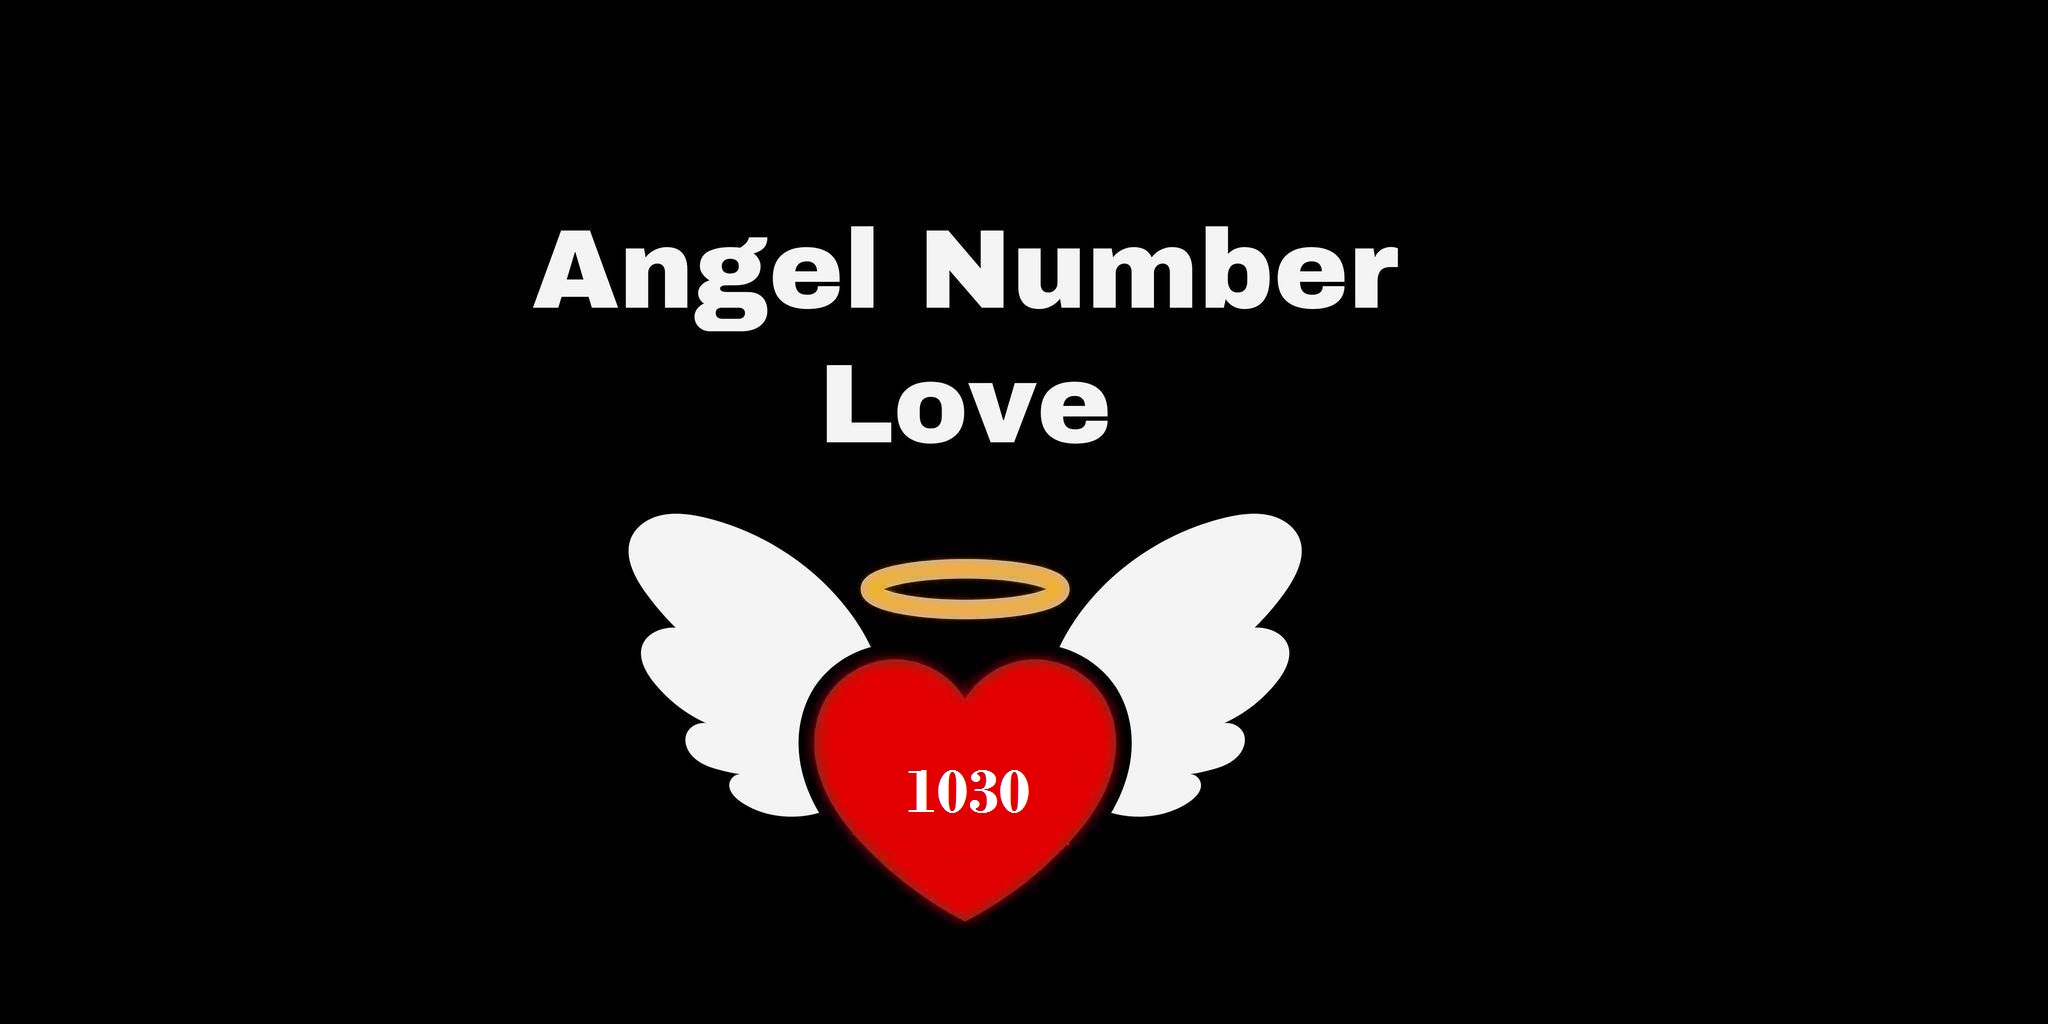 1030 Angel Number Meaning In Love